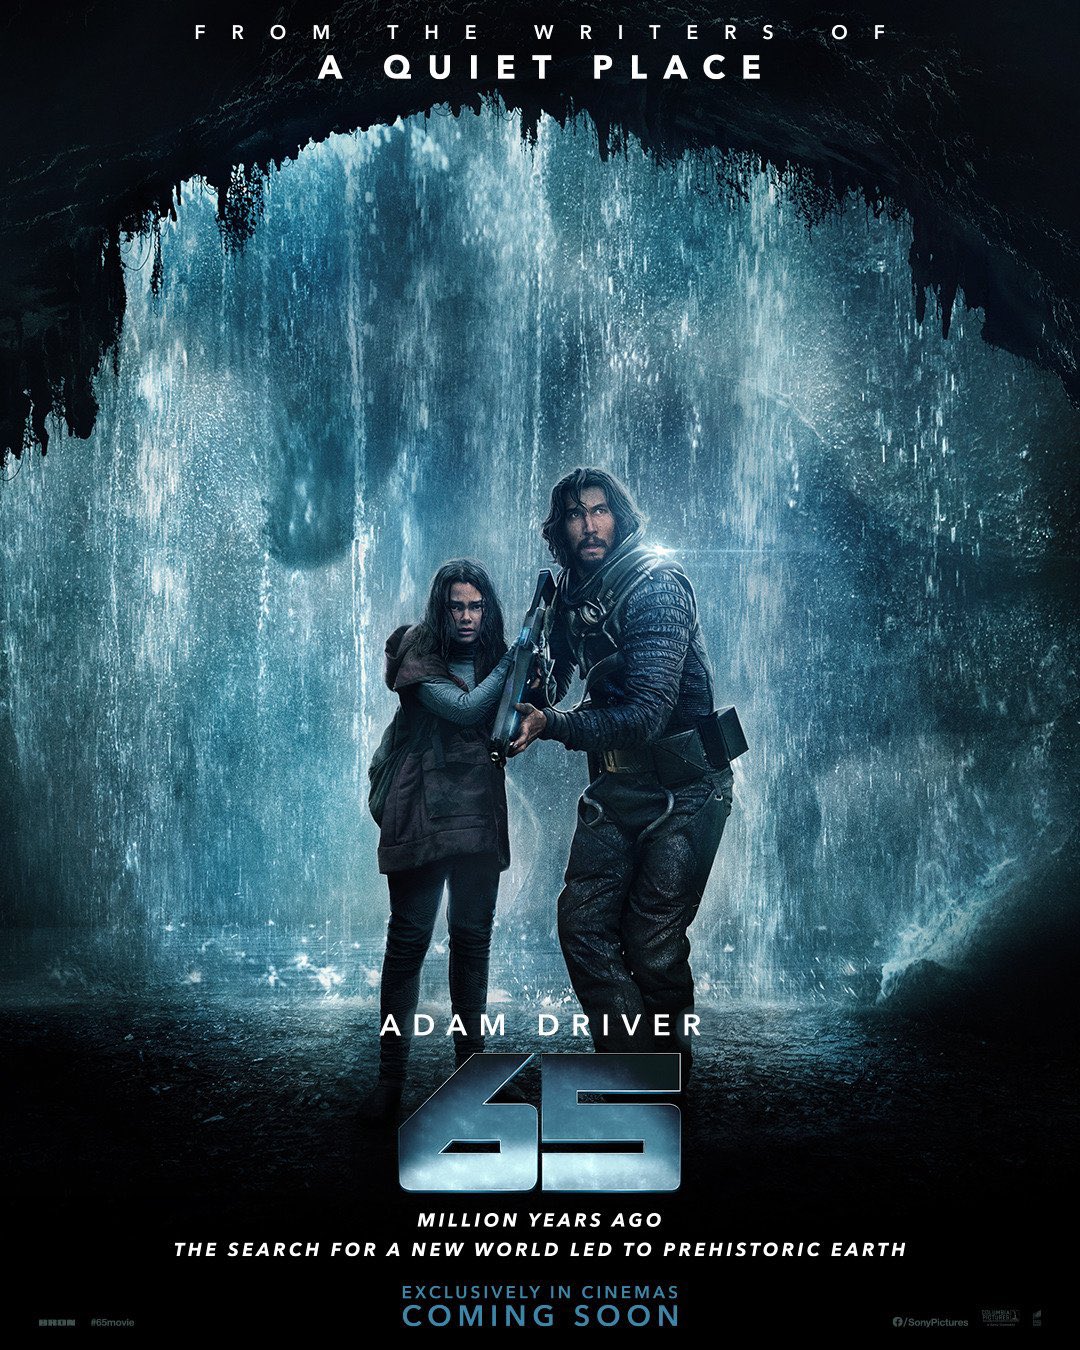 65 Film Review; Even Adam Driver Can’t Save This Sci-fi Thriller.